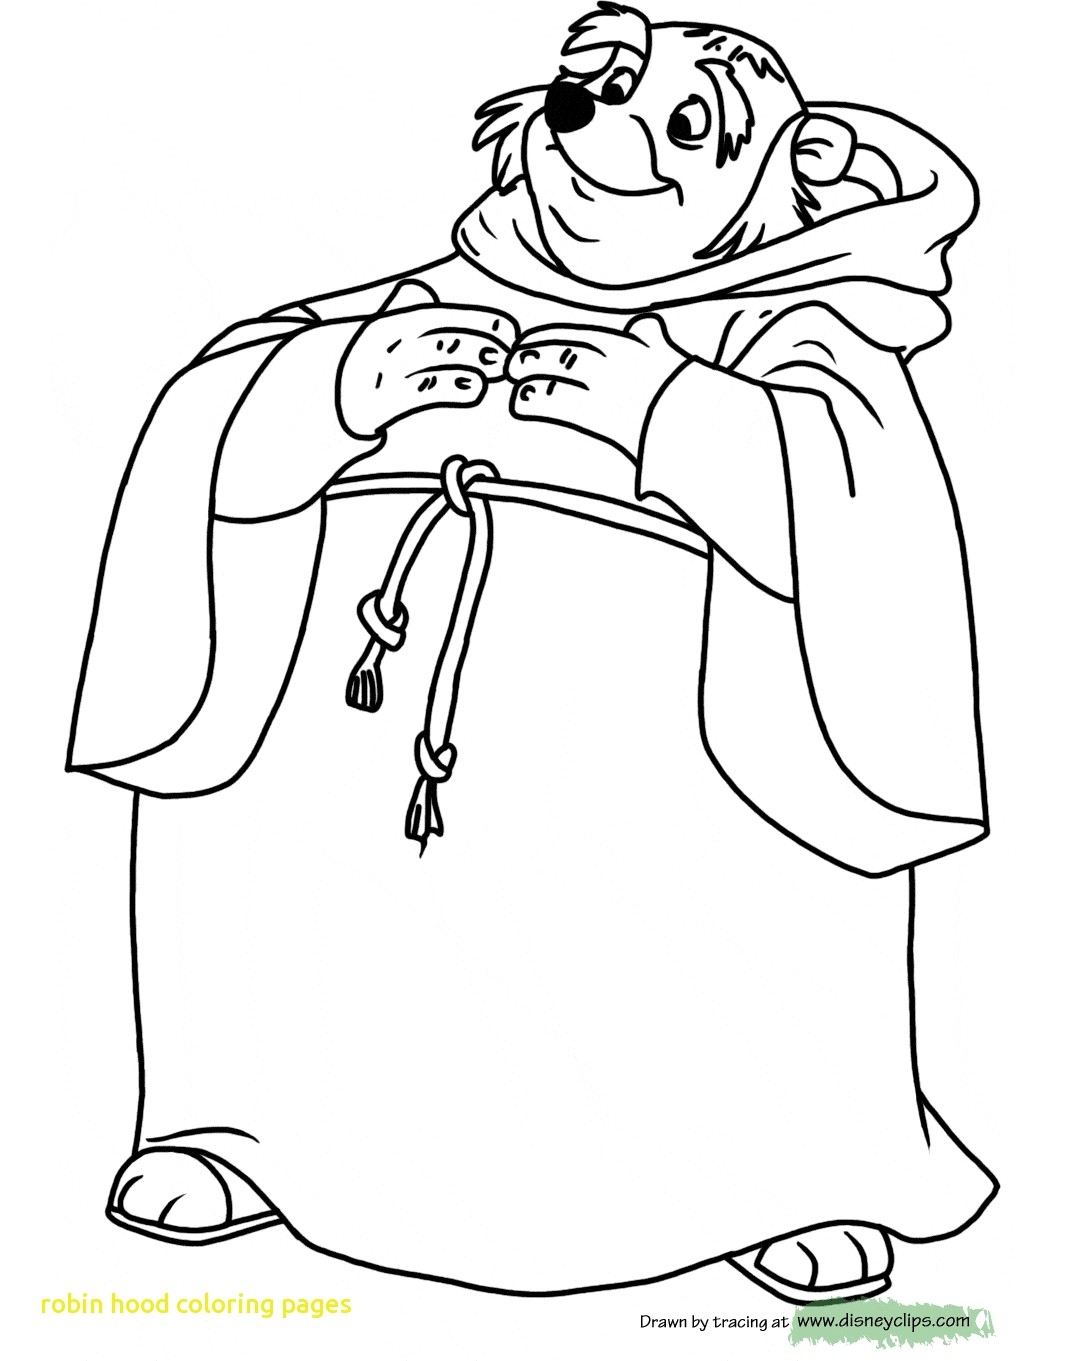 Robin Hood Coloring Pages at GetDrawings | Free download